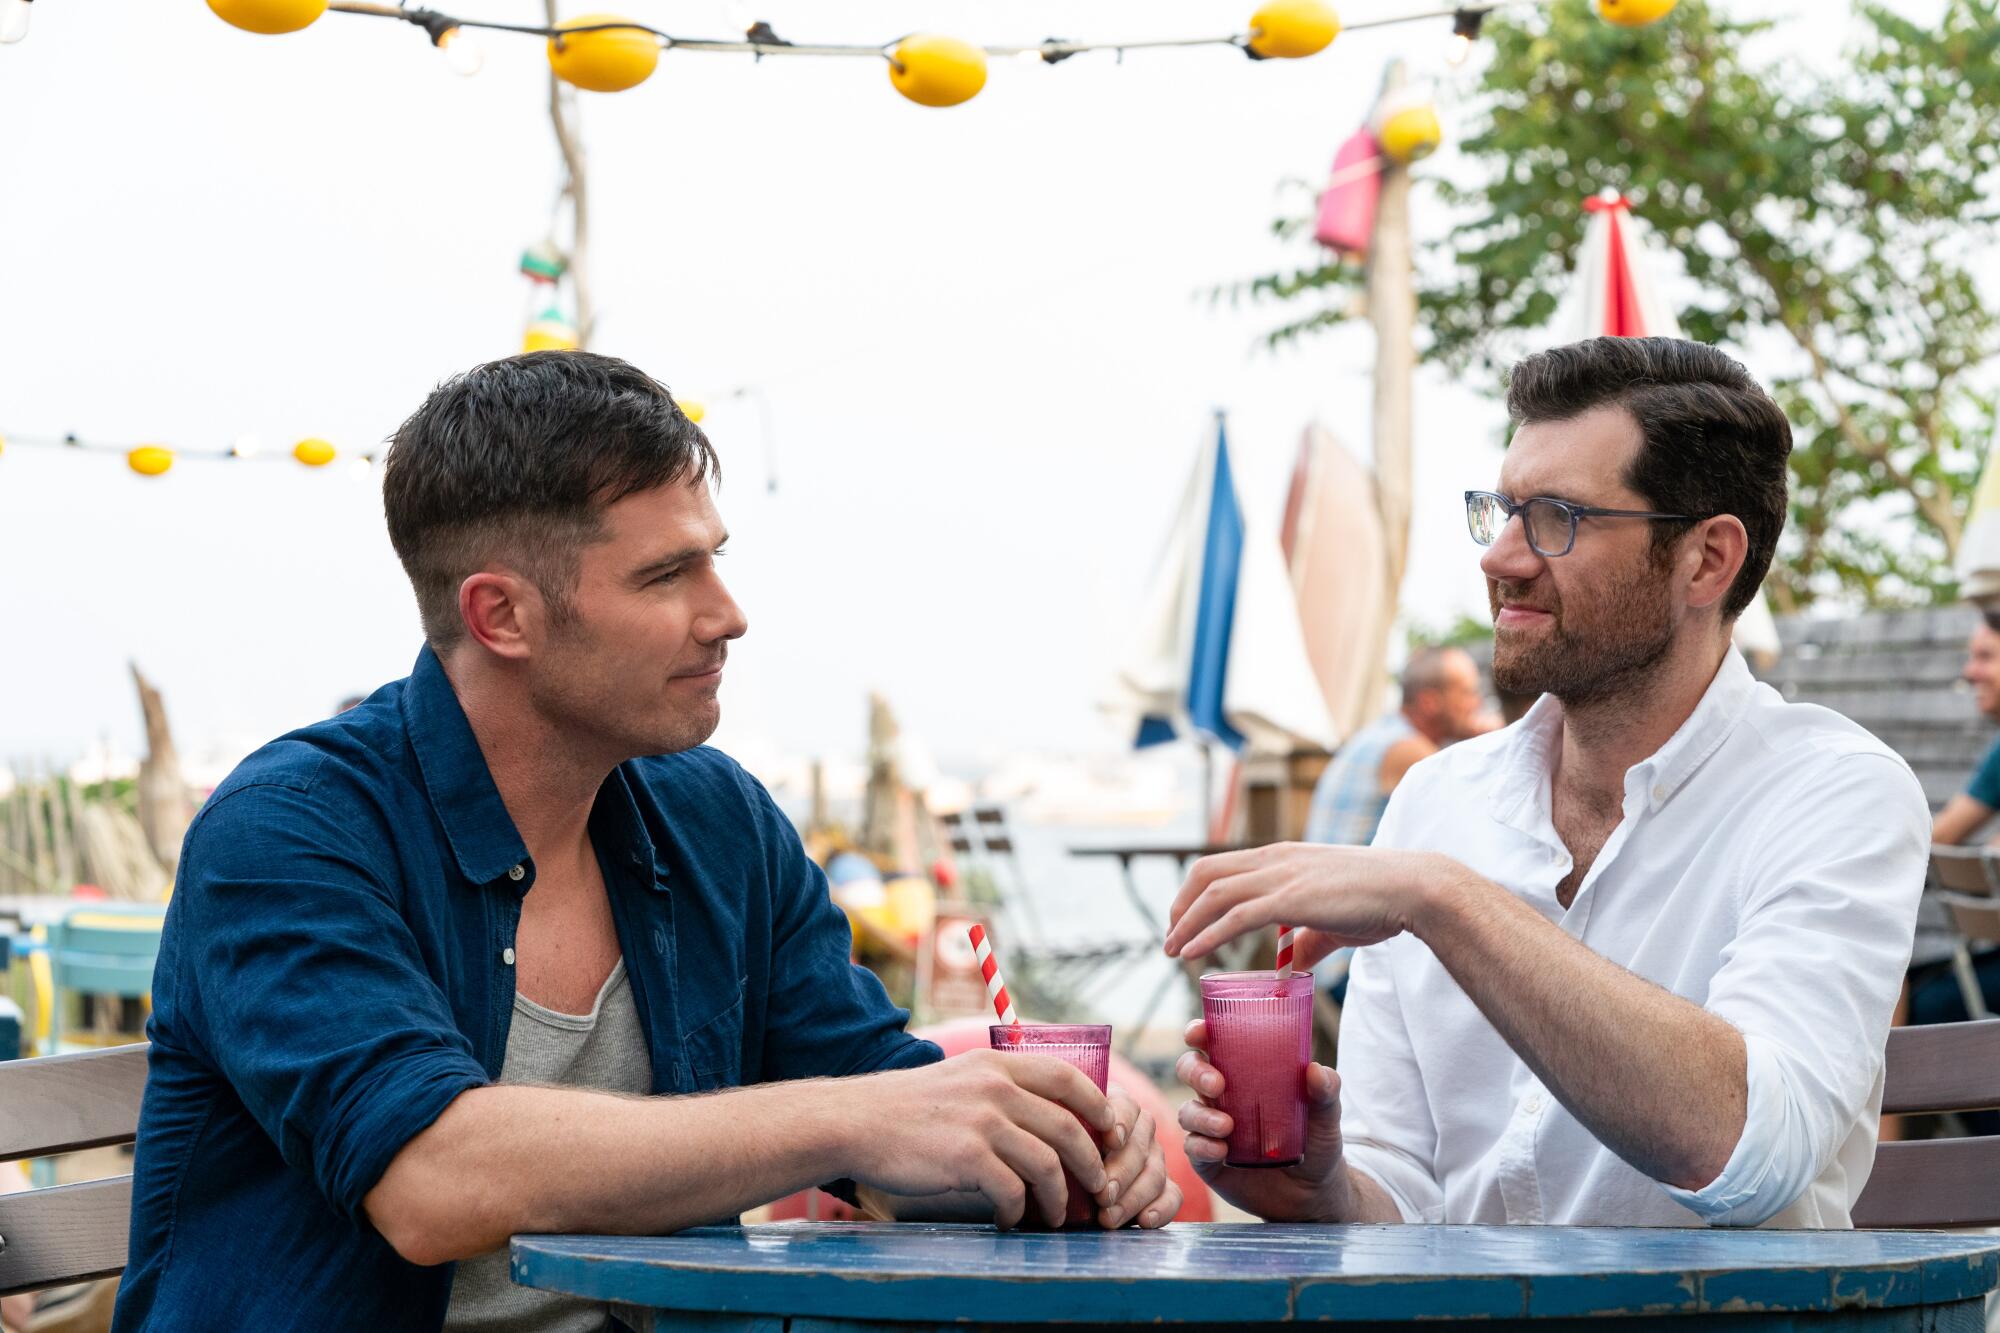 Luke Macfarlane and Billy Eichner in Bros, directed by Nicholas Stoller